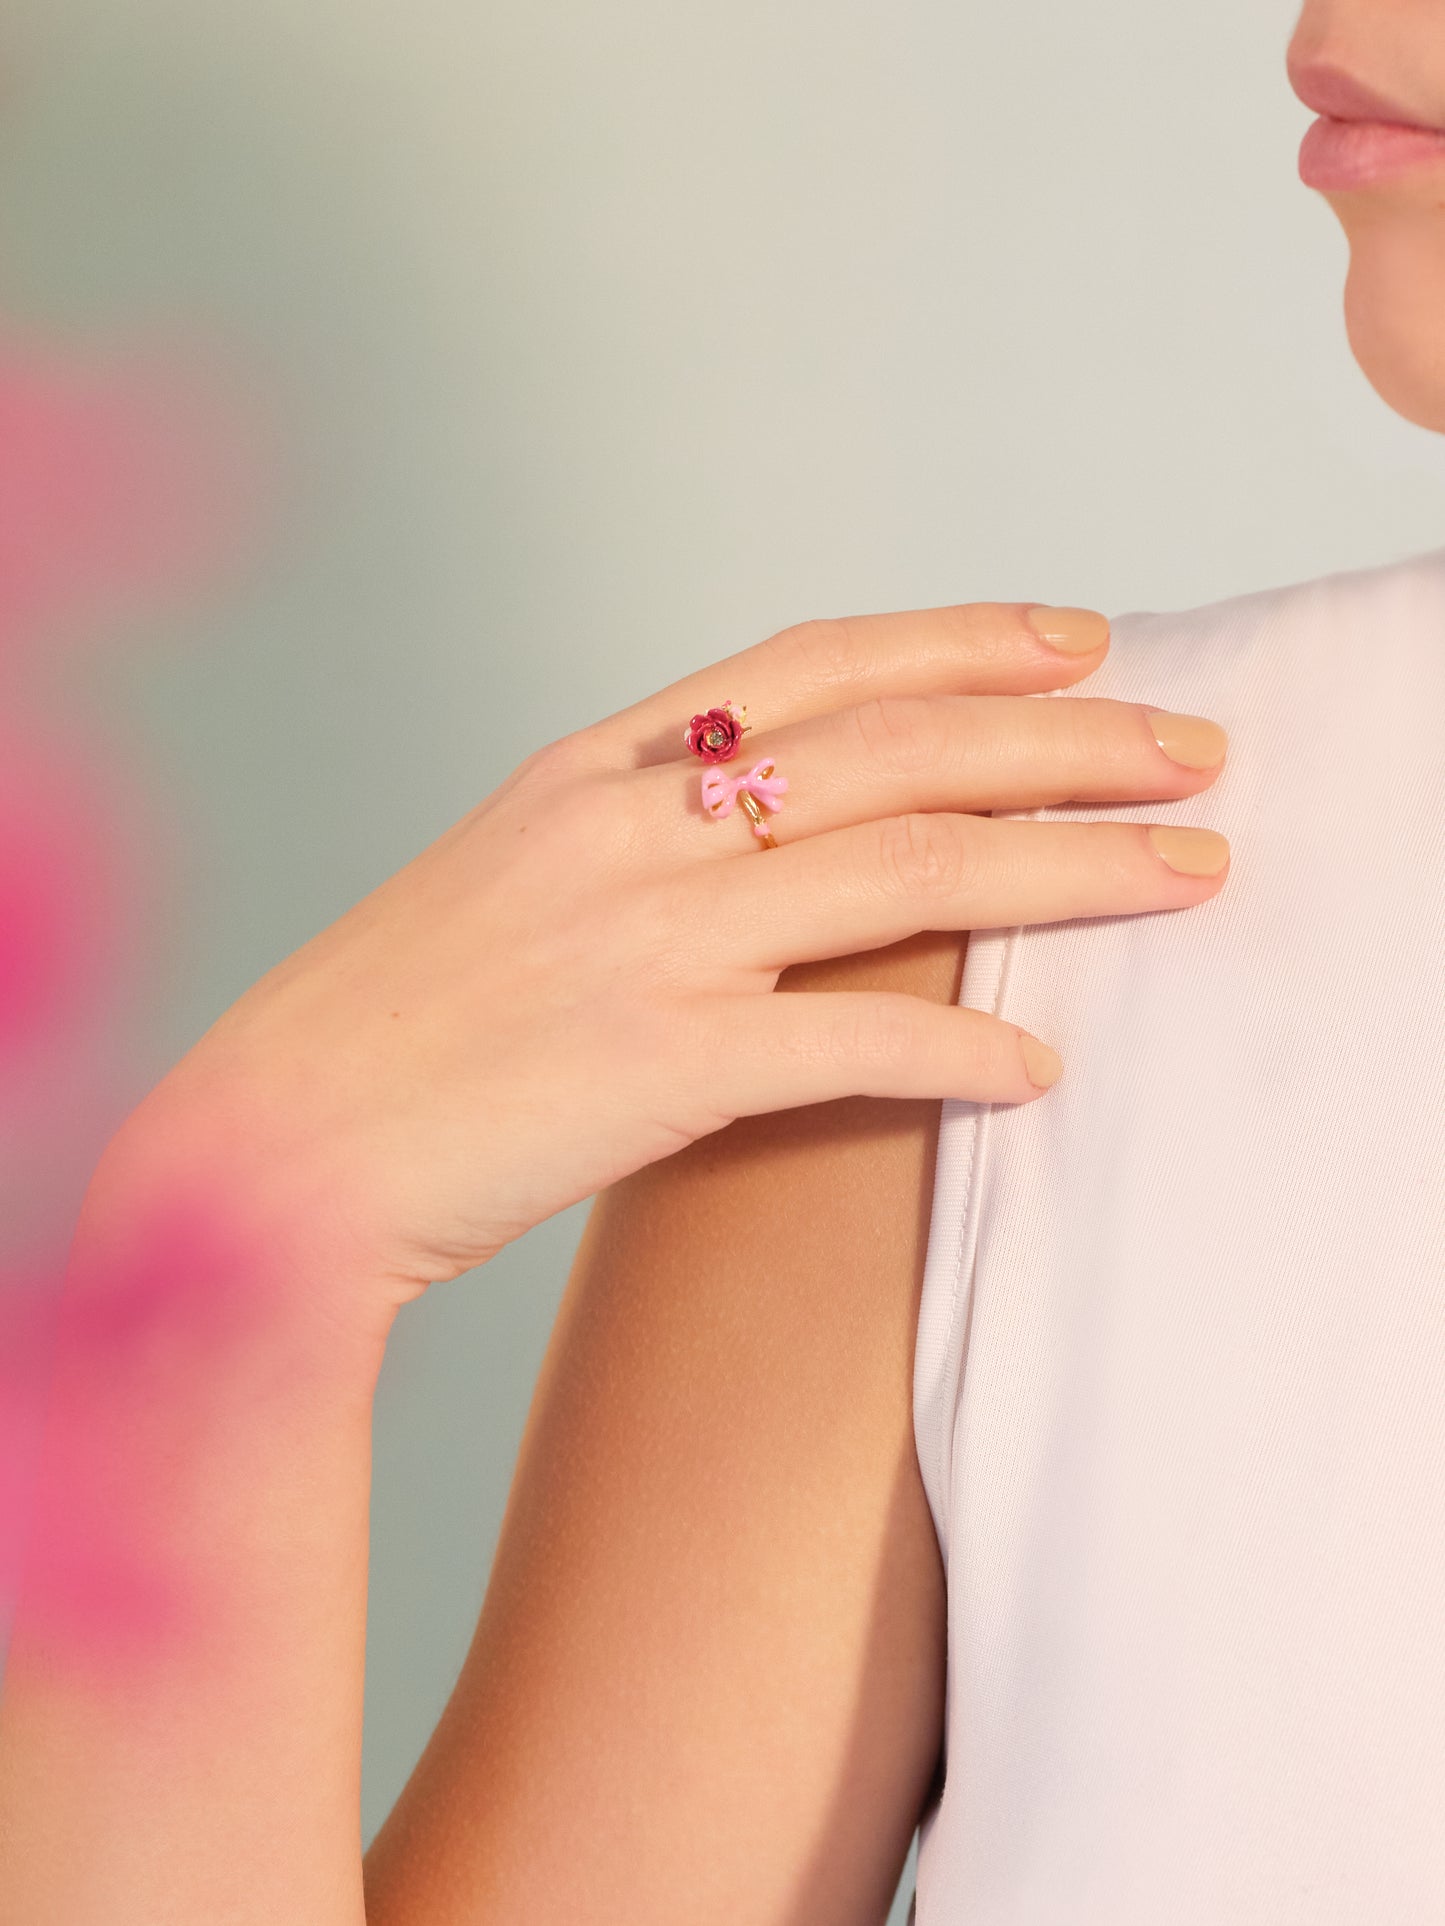 Pink Bow And Flowers Adjustable Ring | APIP6021